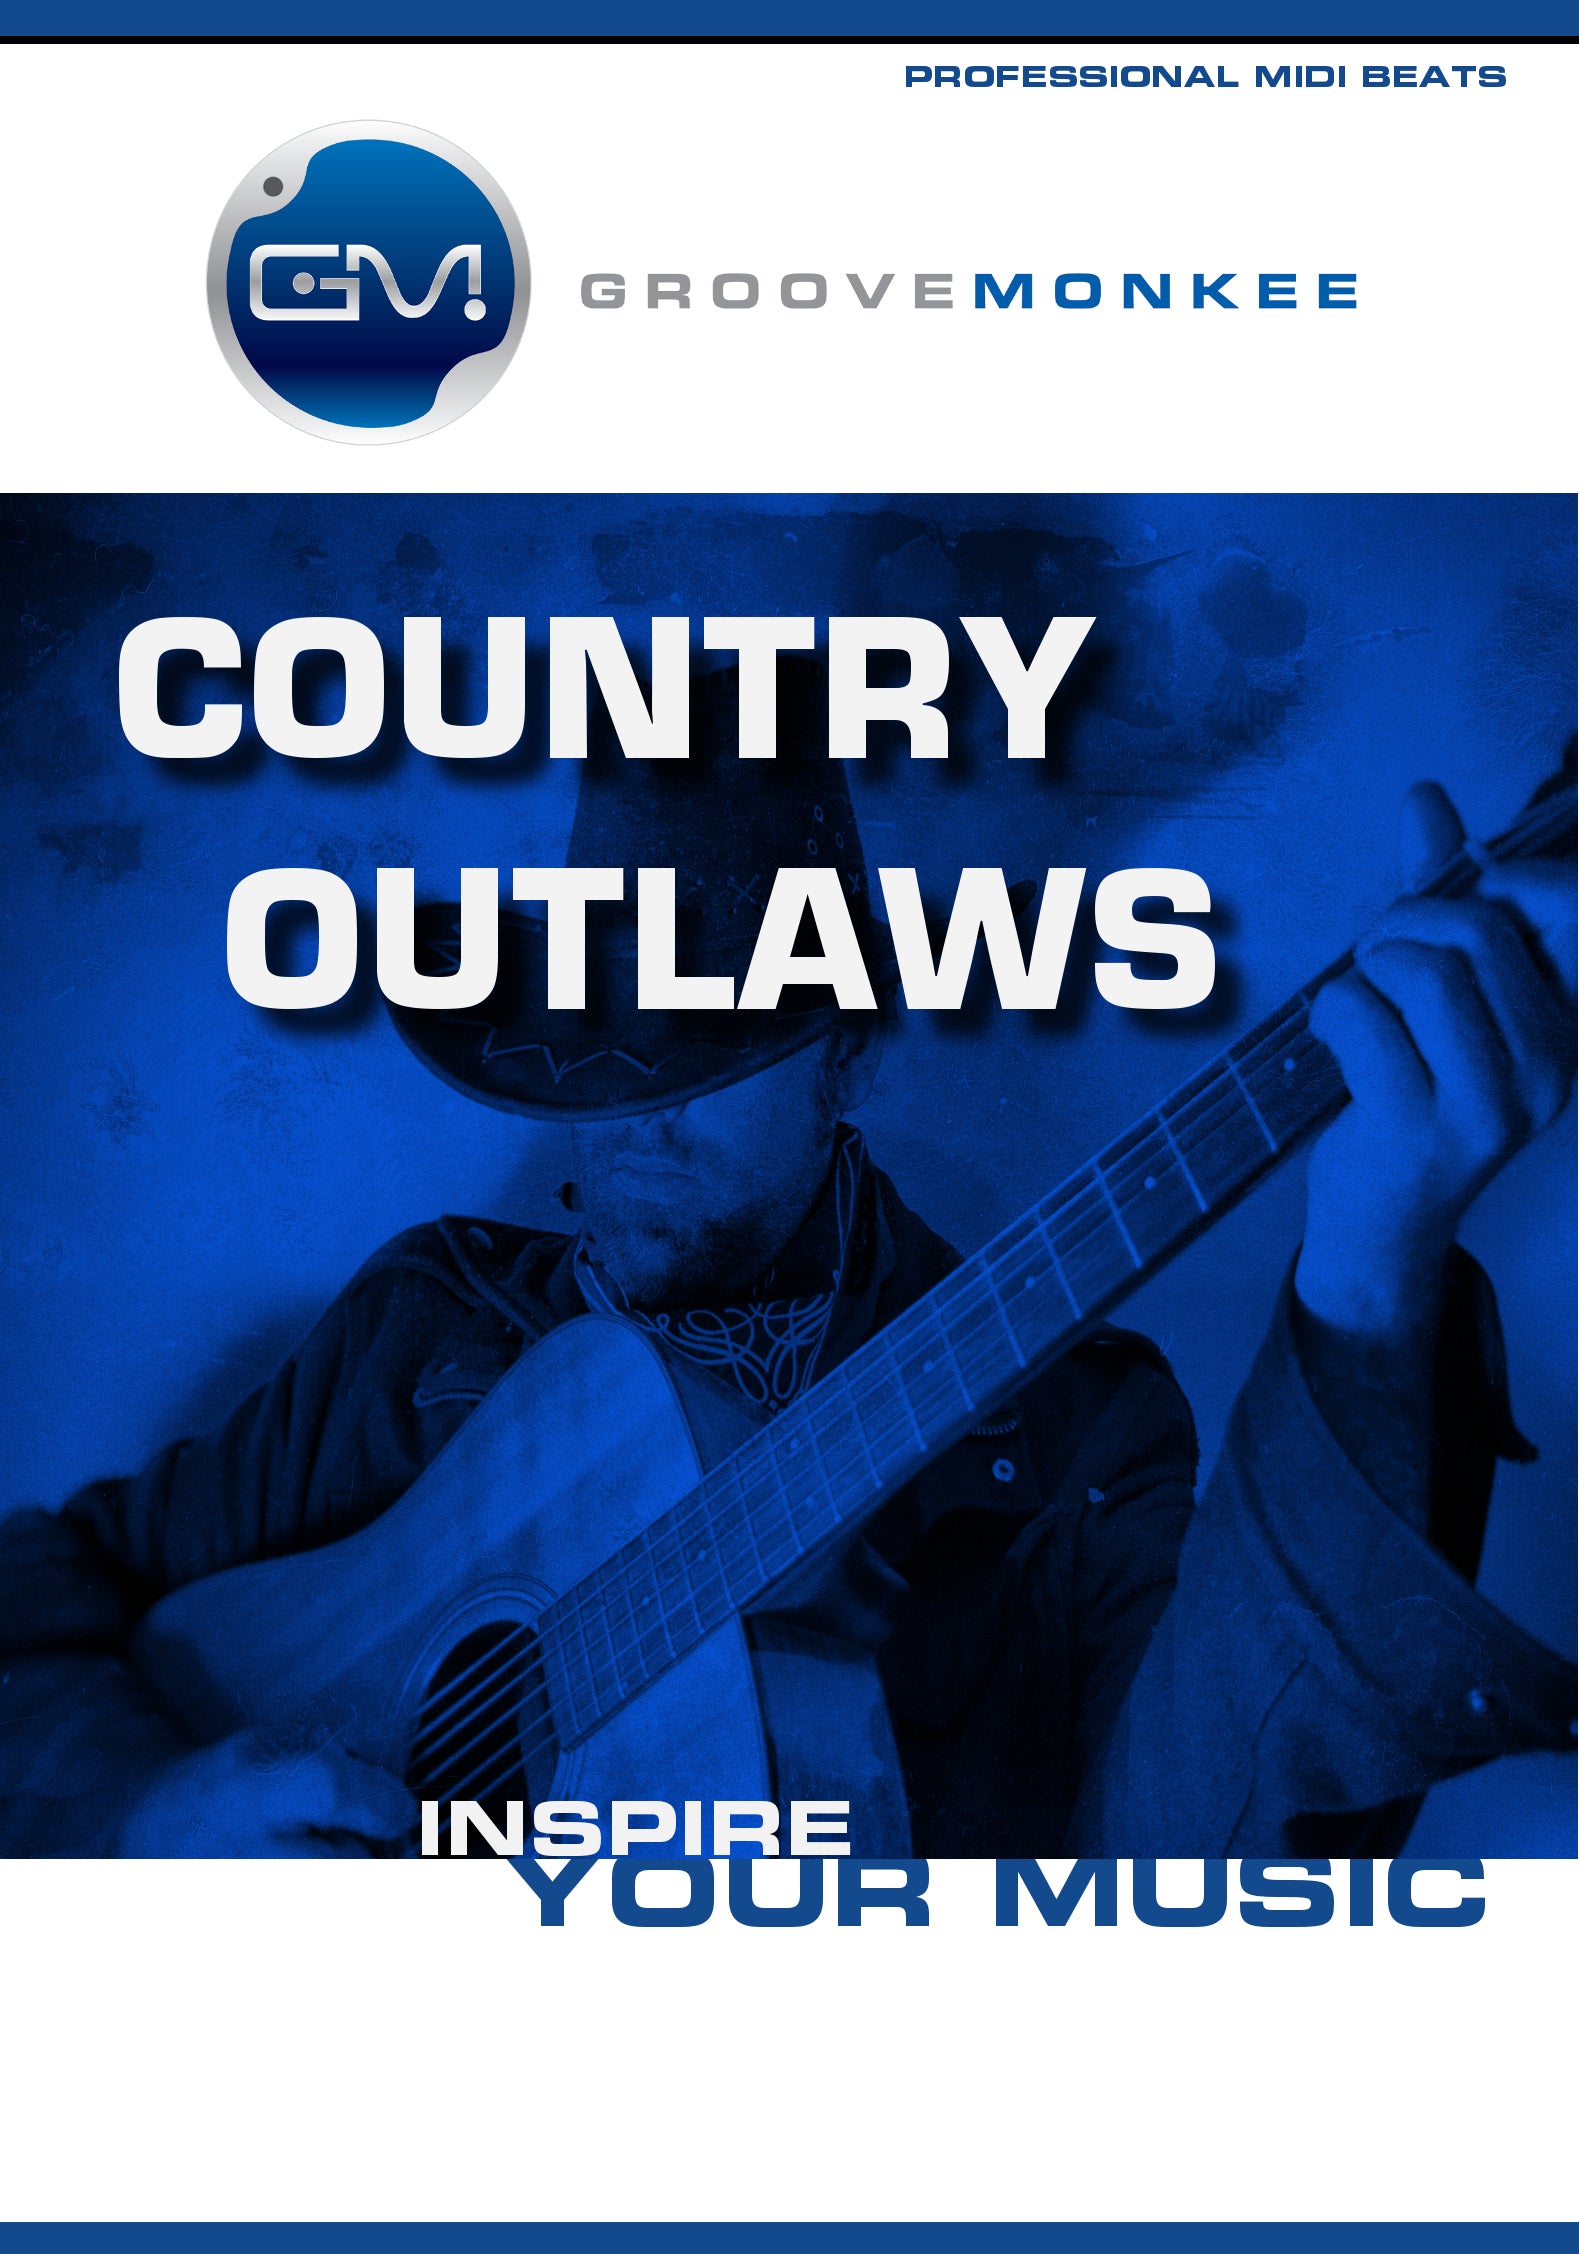 Country Outlaws MIDI Loops